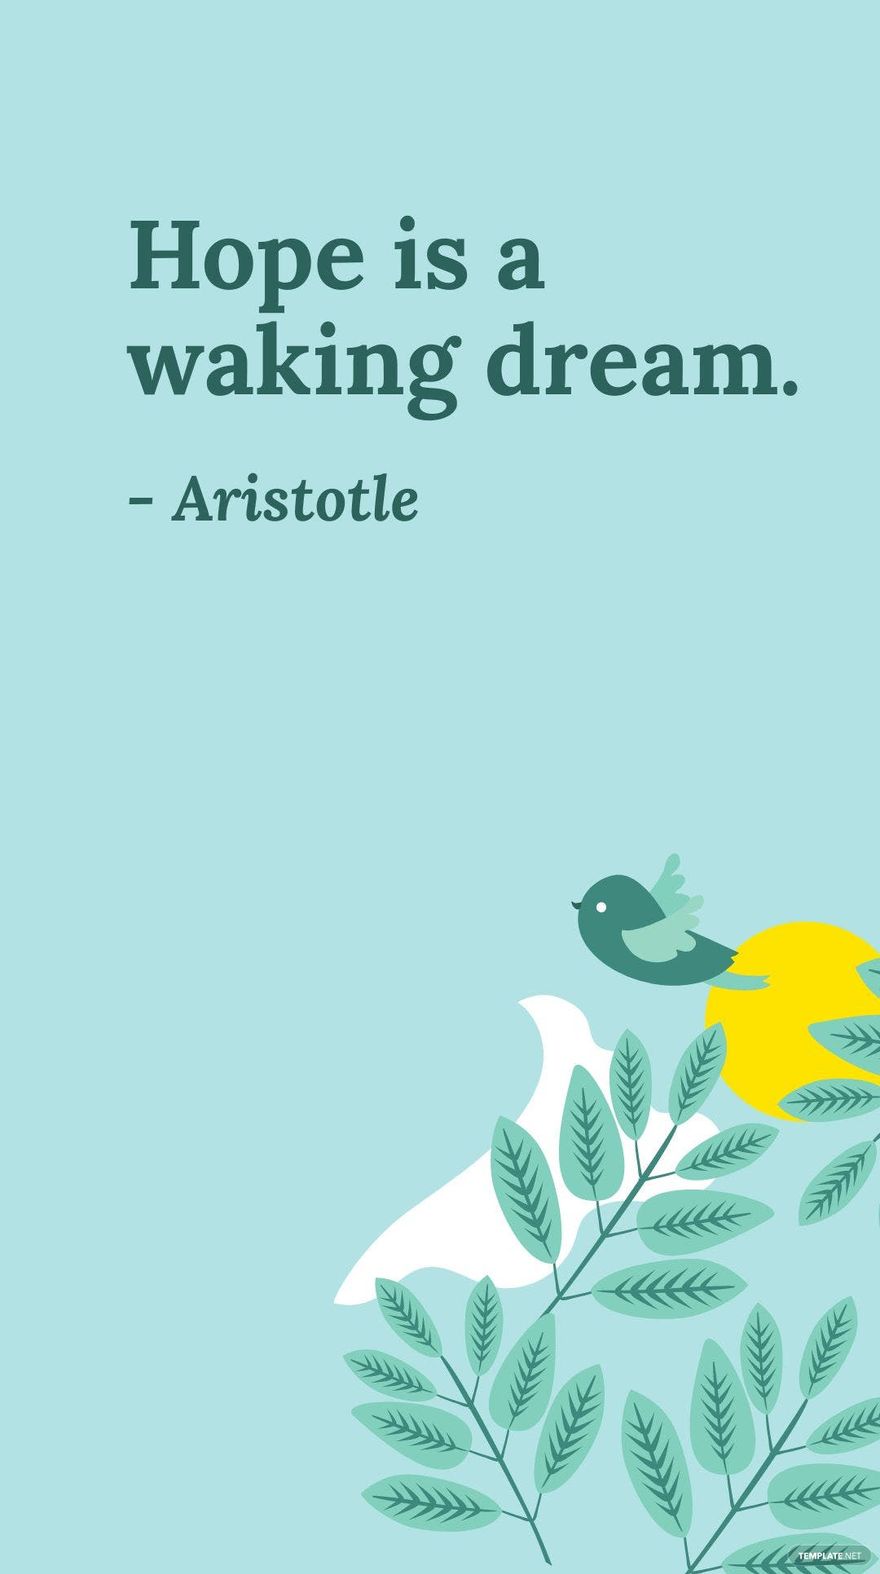 Aristotle - Hope is a waking dream.